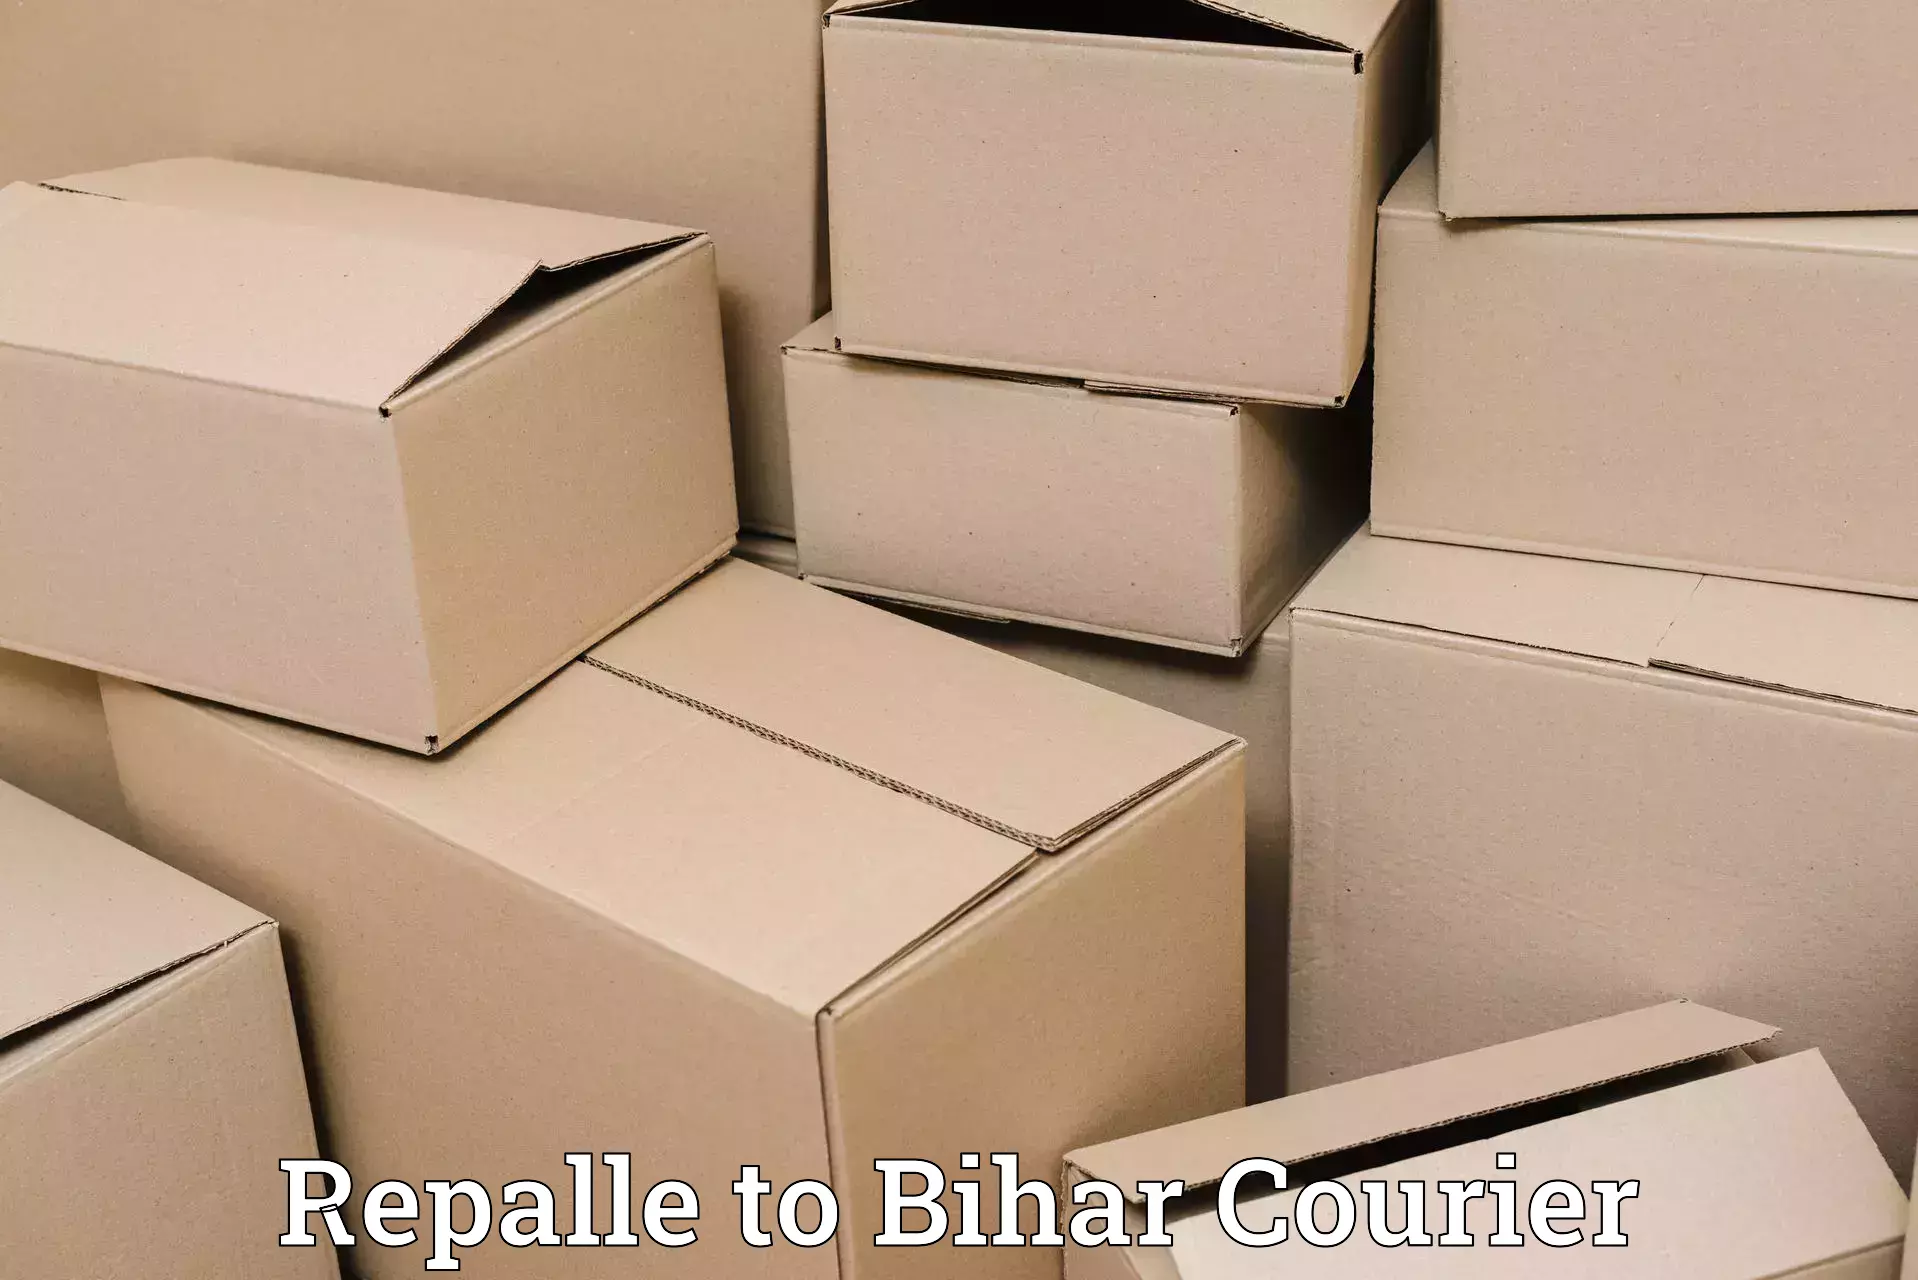 Express baggage shipping Repalle to Bihar